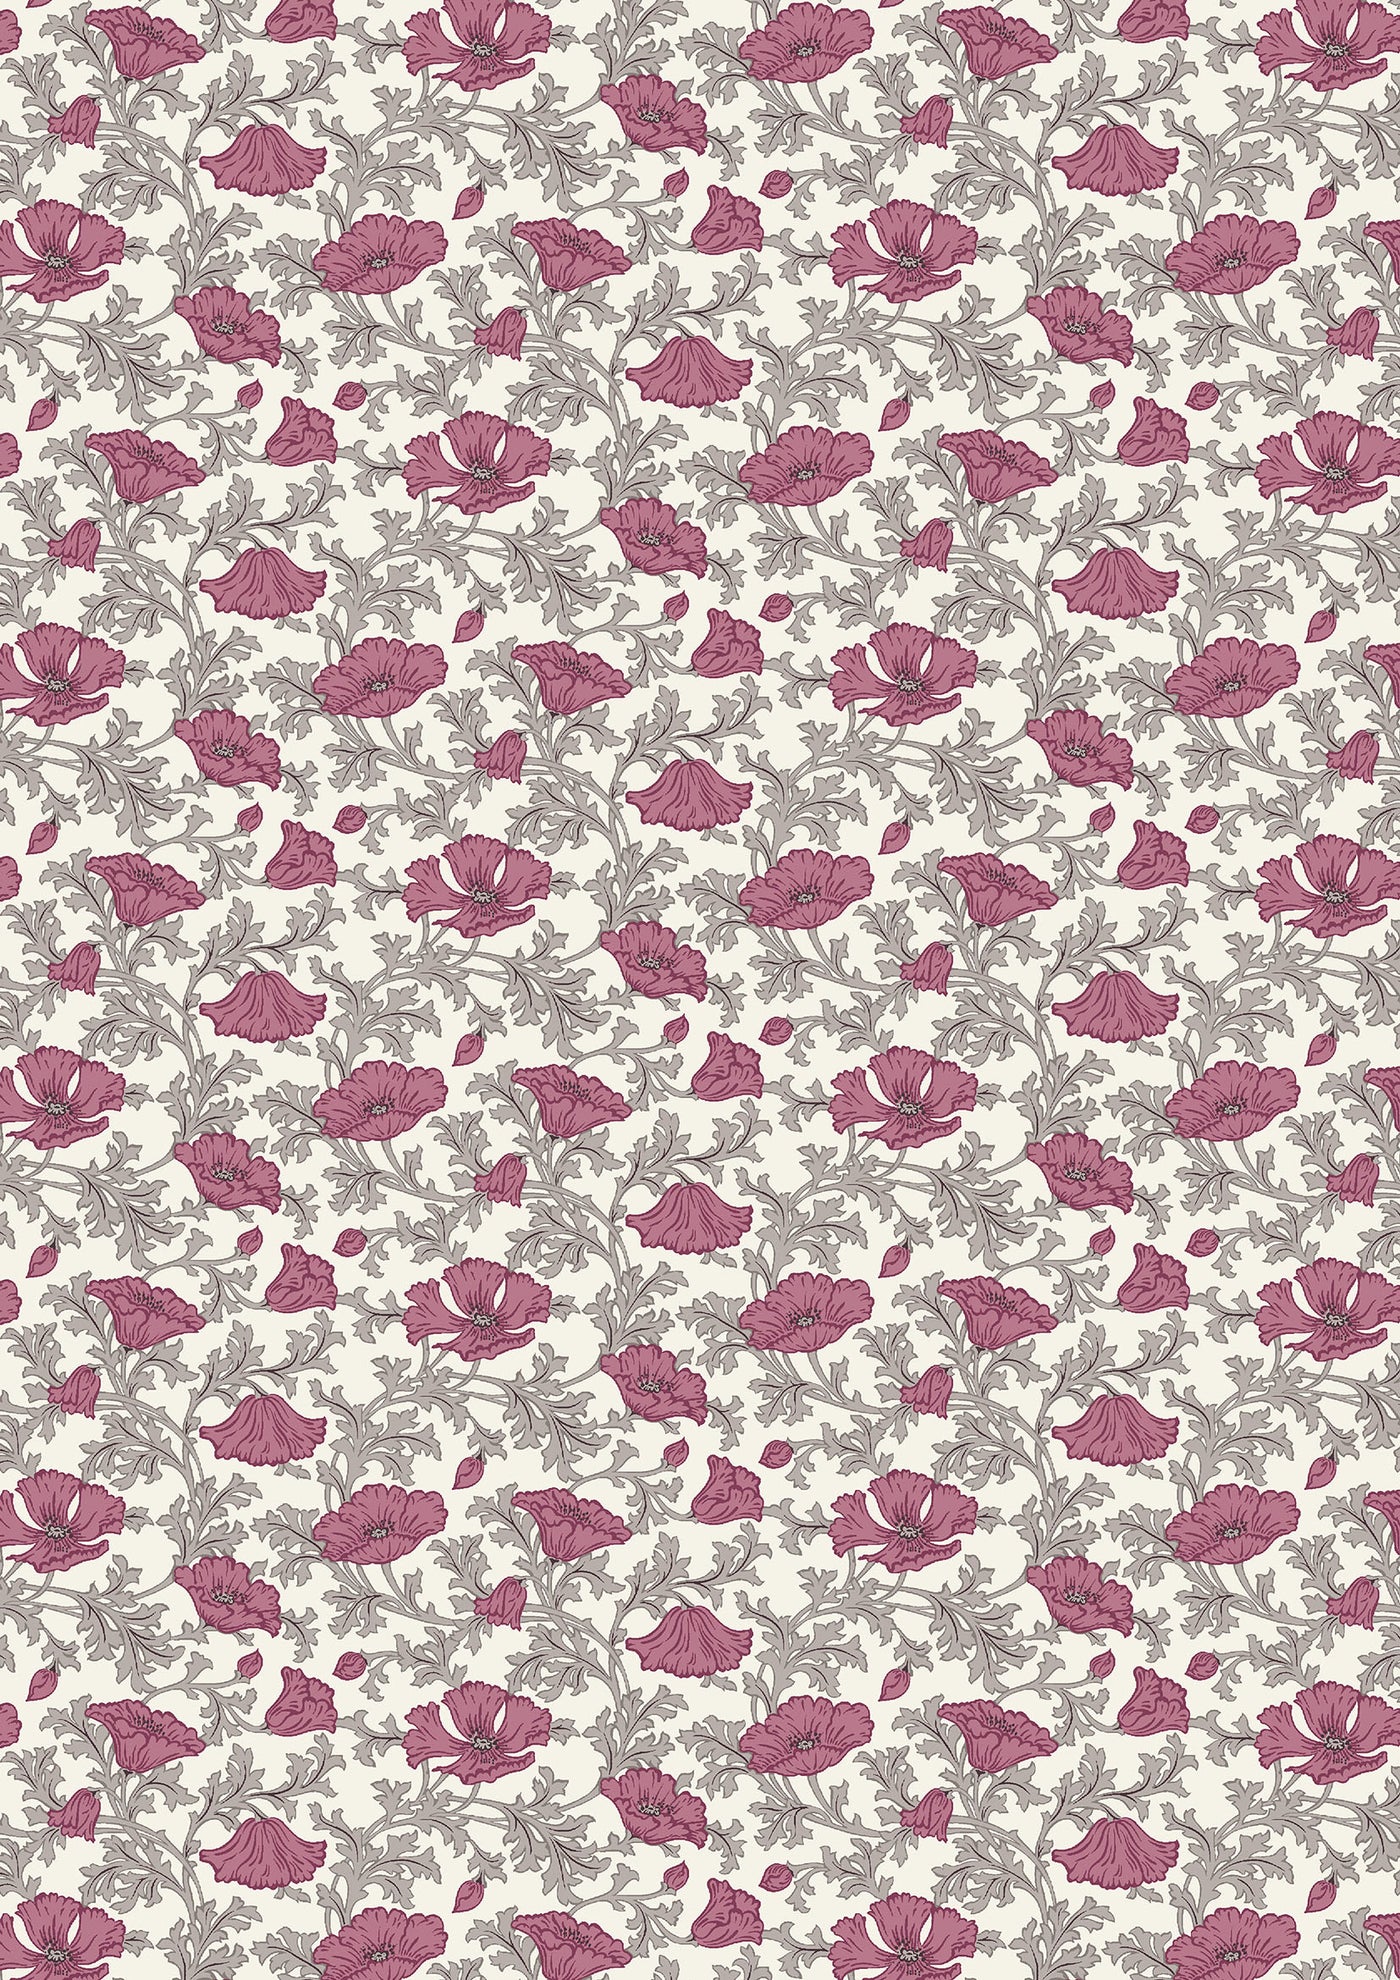 nina poppy from the winterbourne collection by Liberty of London fabrics